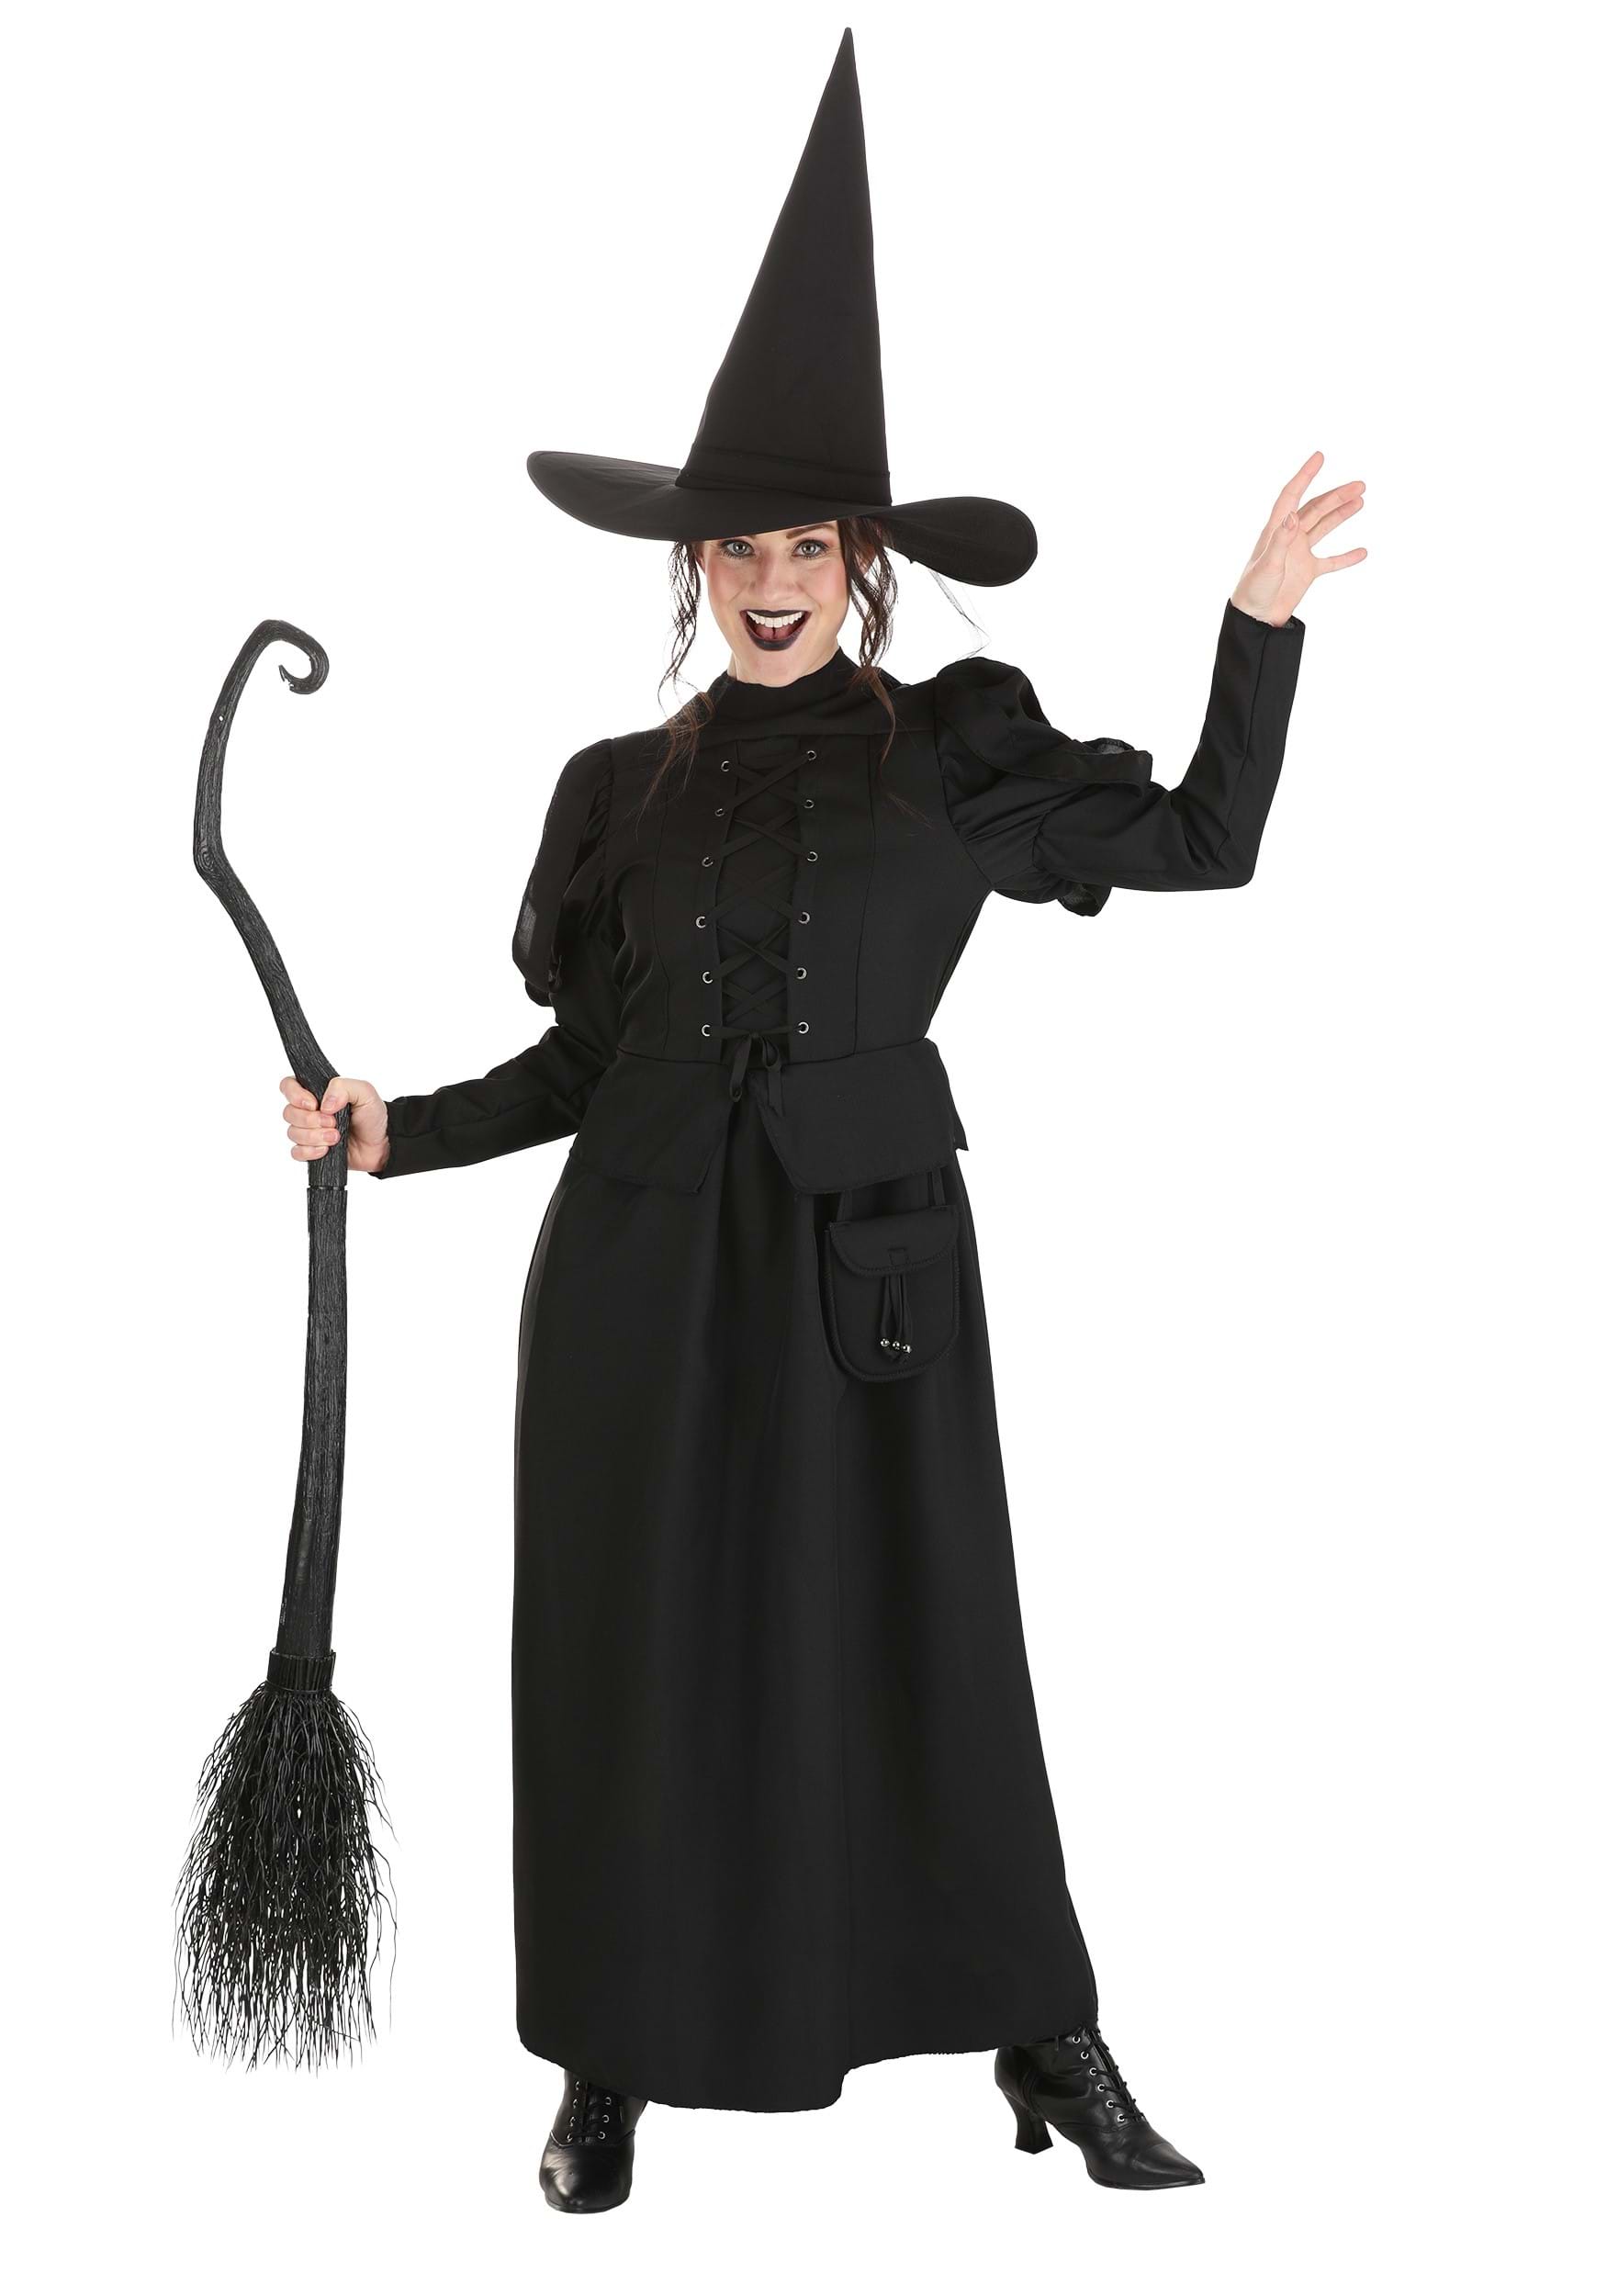 Image of Wizard of Oz Wicked Witch Costume for Women ID JLJLF1040AD-M